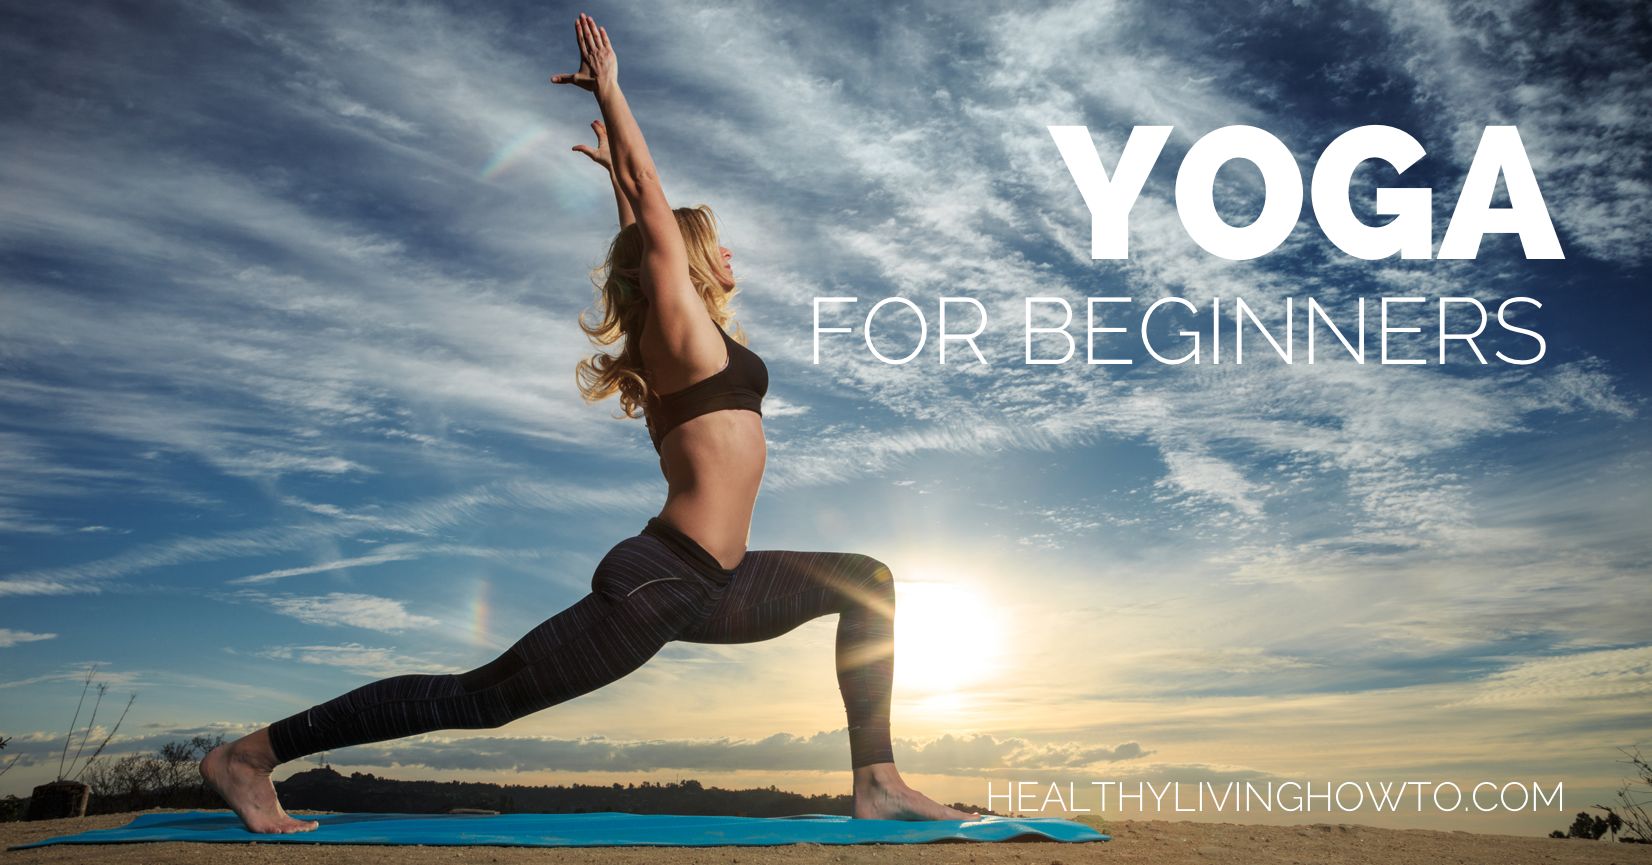 Yoga For Beginners | healthylivinghowto.com